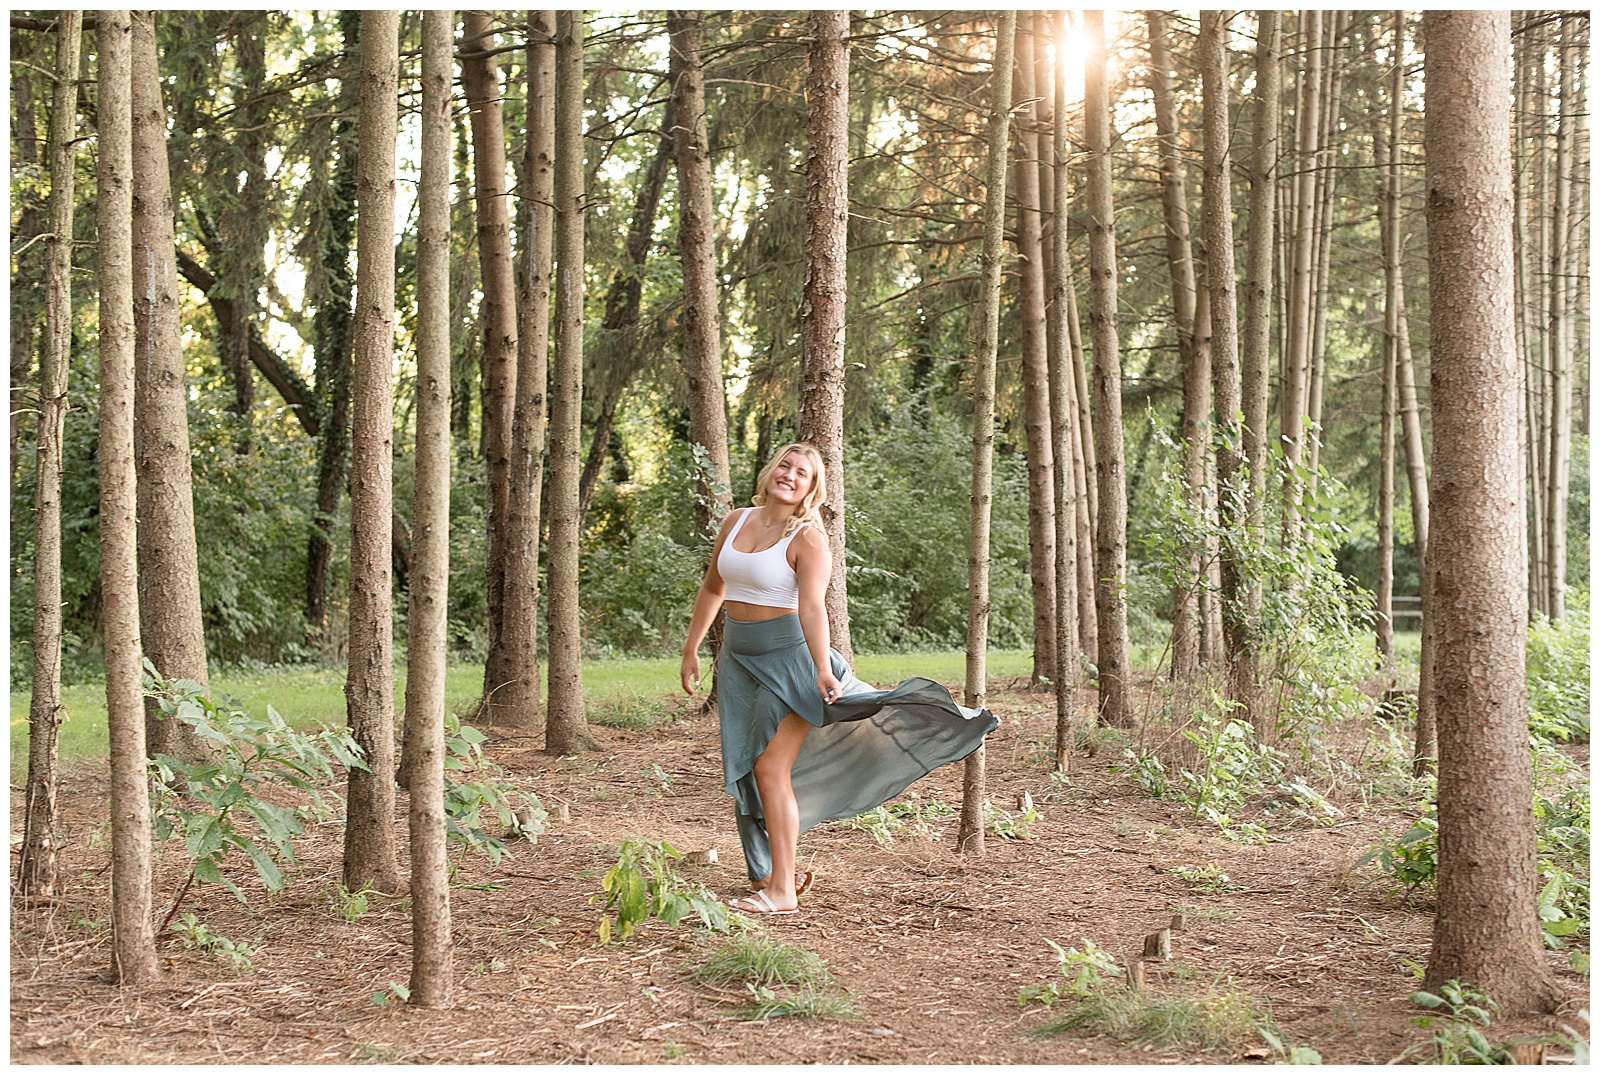 girl turned smiling with skirt blowing in wind among evergreen tree row at overlook park